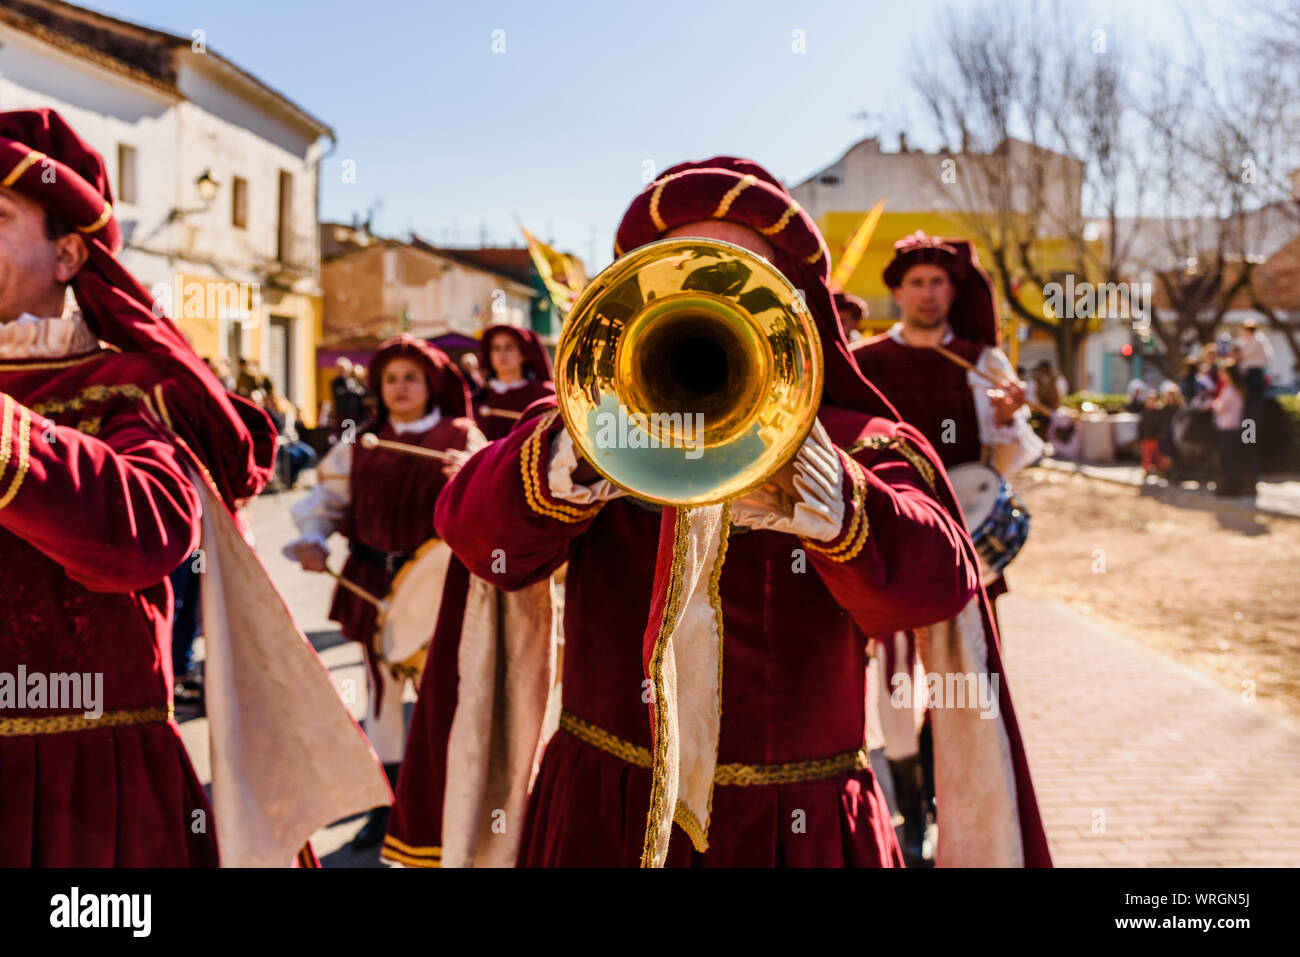 Valencia, Spain- January 27, 2019: Trumpeters dressed as medieval troubadours playing the trumpet during a medieval festival. Stock Photo